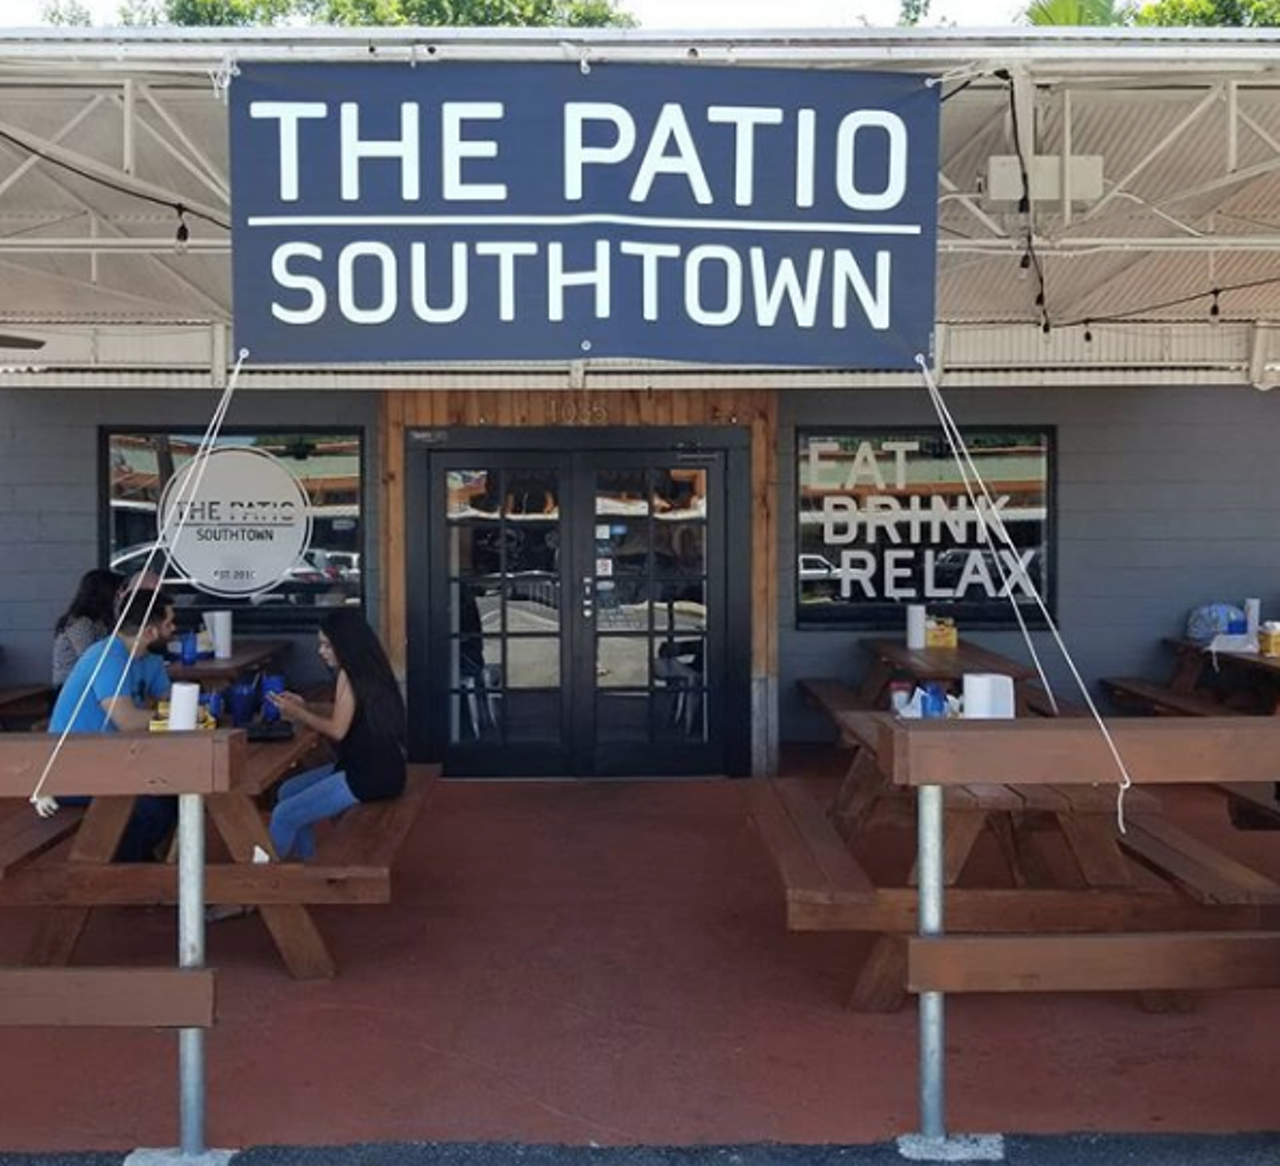 The Patio Southtown
1035 S Presa St, (210) 908-9888, facebook.com
Bar food, patio pounders and more at this muy laid back Southtown patio.
Photo via Instagram / robaroonixon